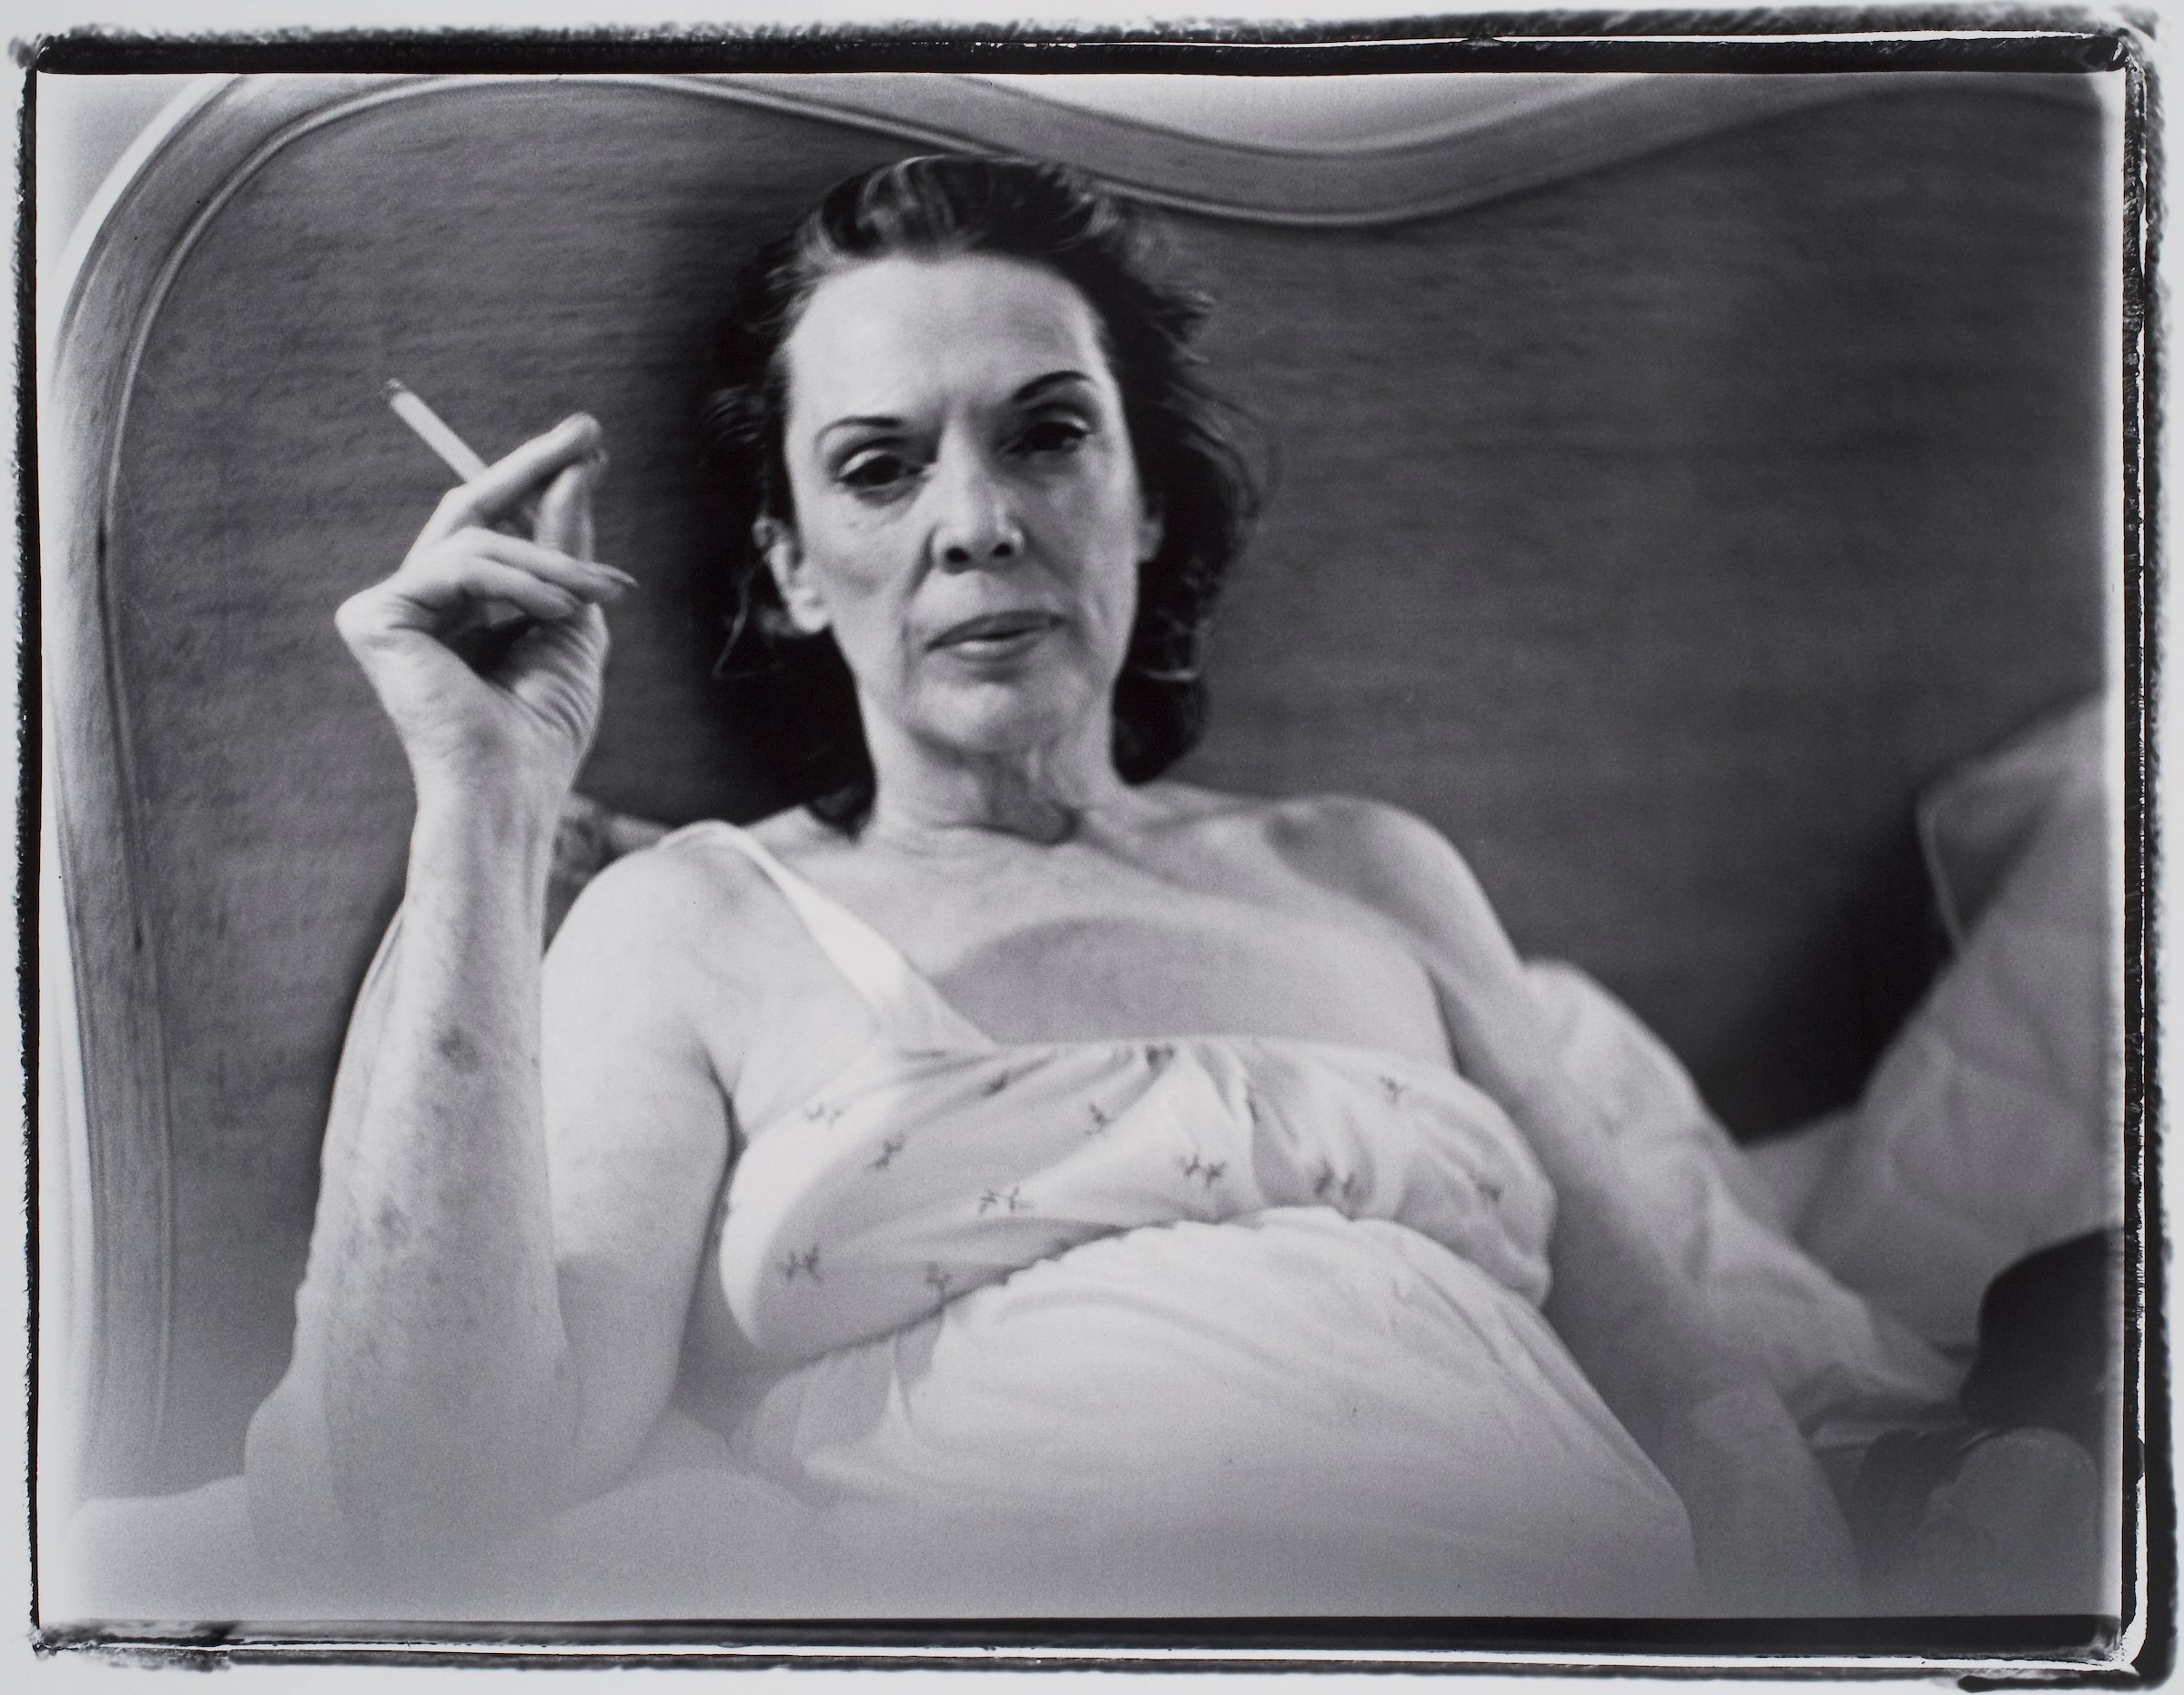 A gelatin silver print photograph of a mother holding a burning cigarette by Marilyn Minter, entitled Coral Ridge Towers (Mom Smoking) dated 1969